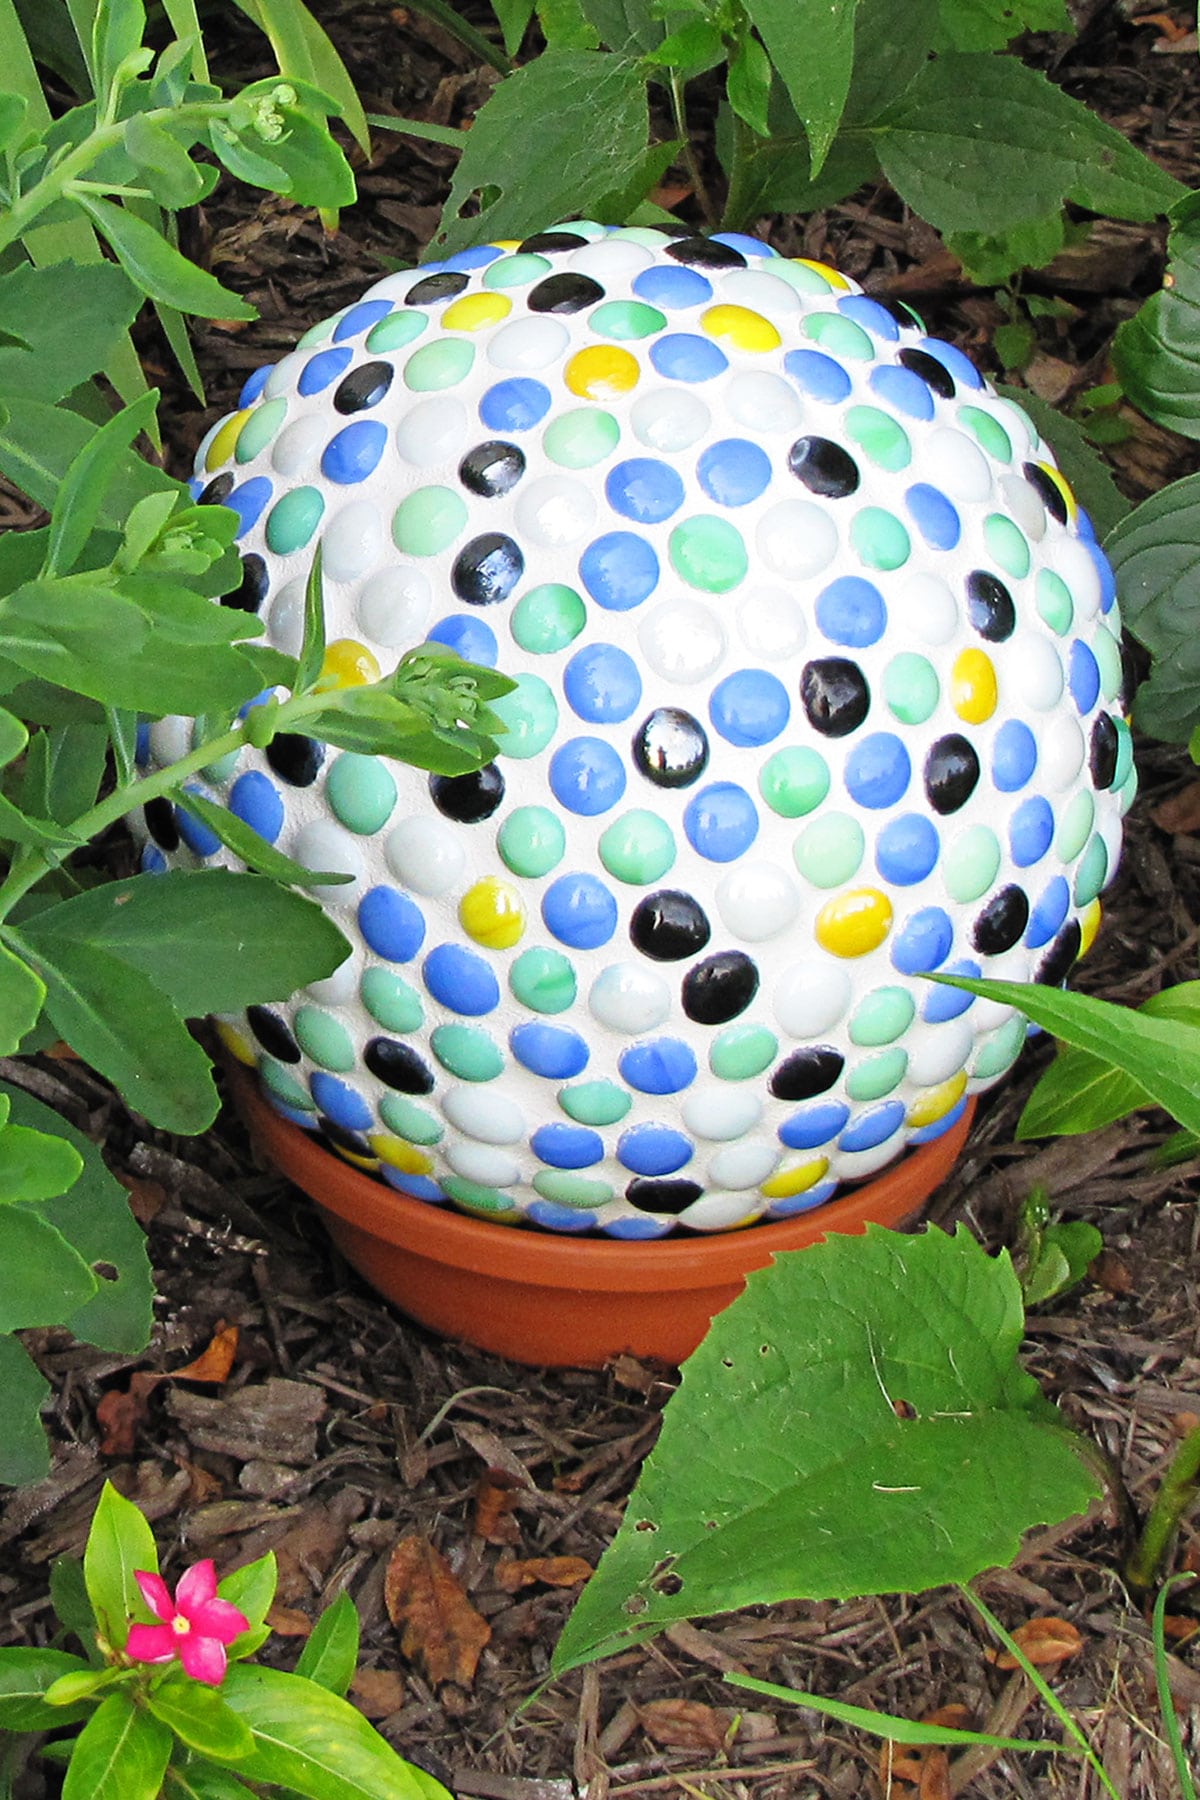 Bowling ball yard art made from covering a bowling ball with mosaic gems and displaying in the garden.